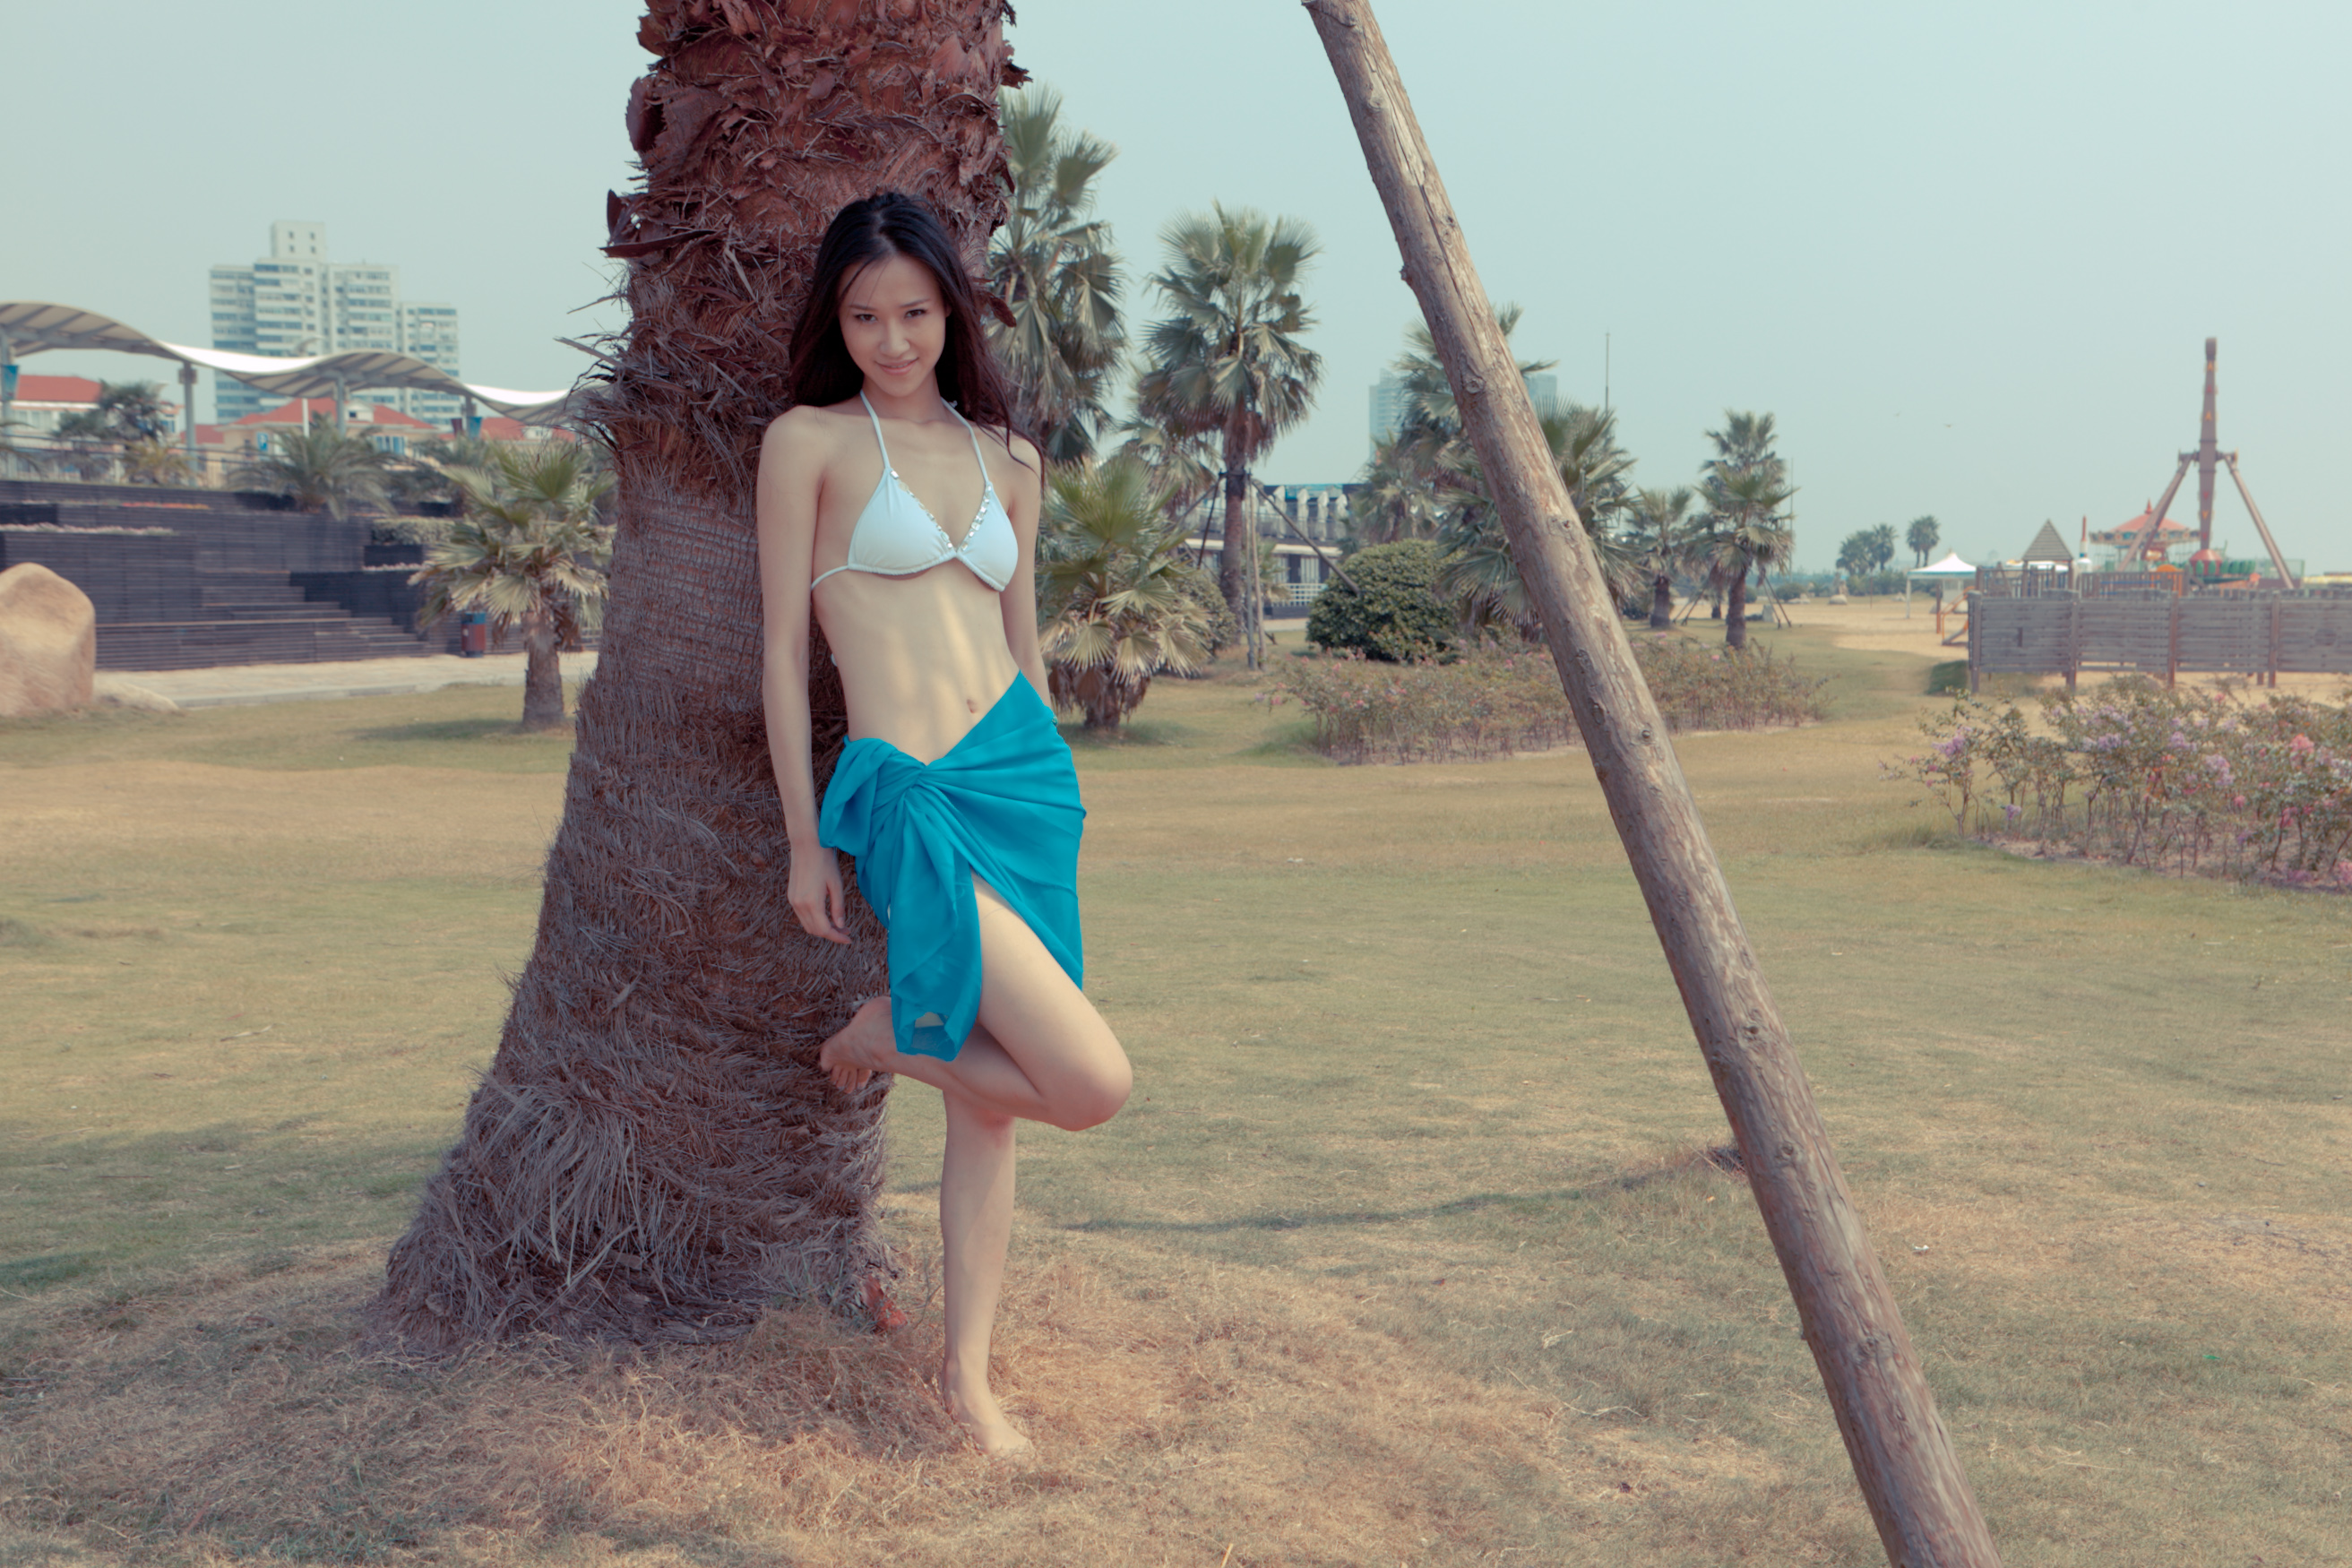 FileAsian model leaning against a palm tree (6775969659) photo